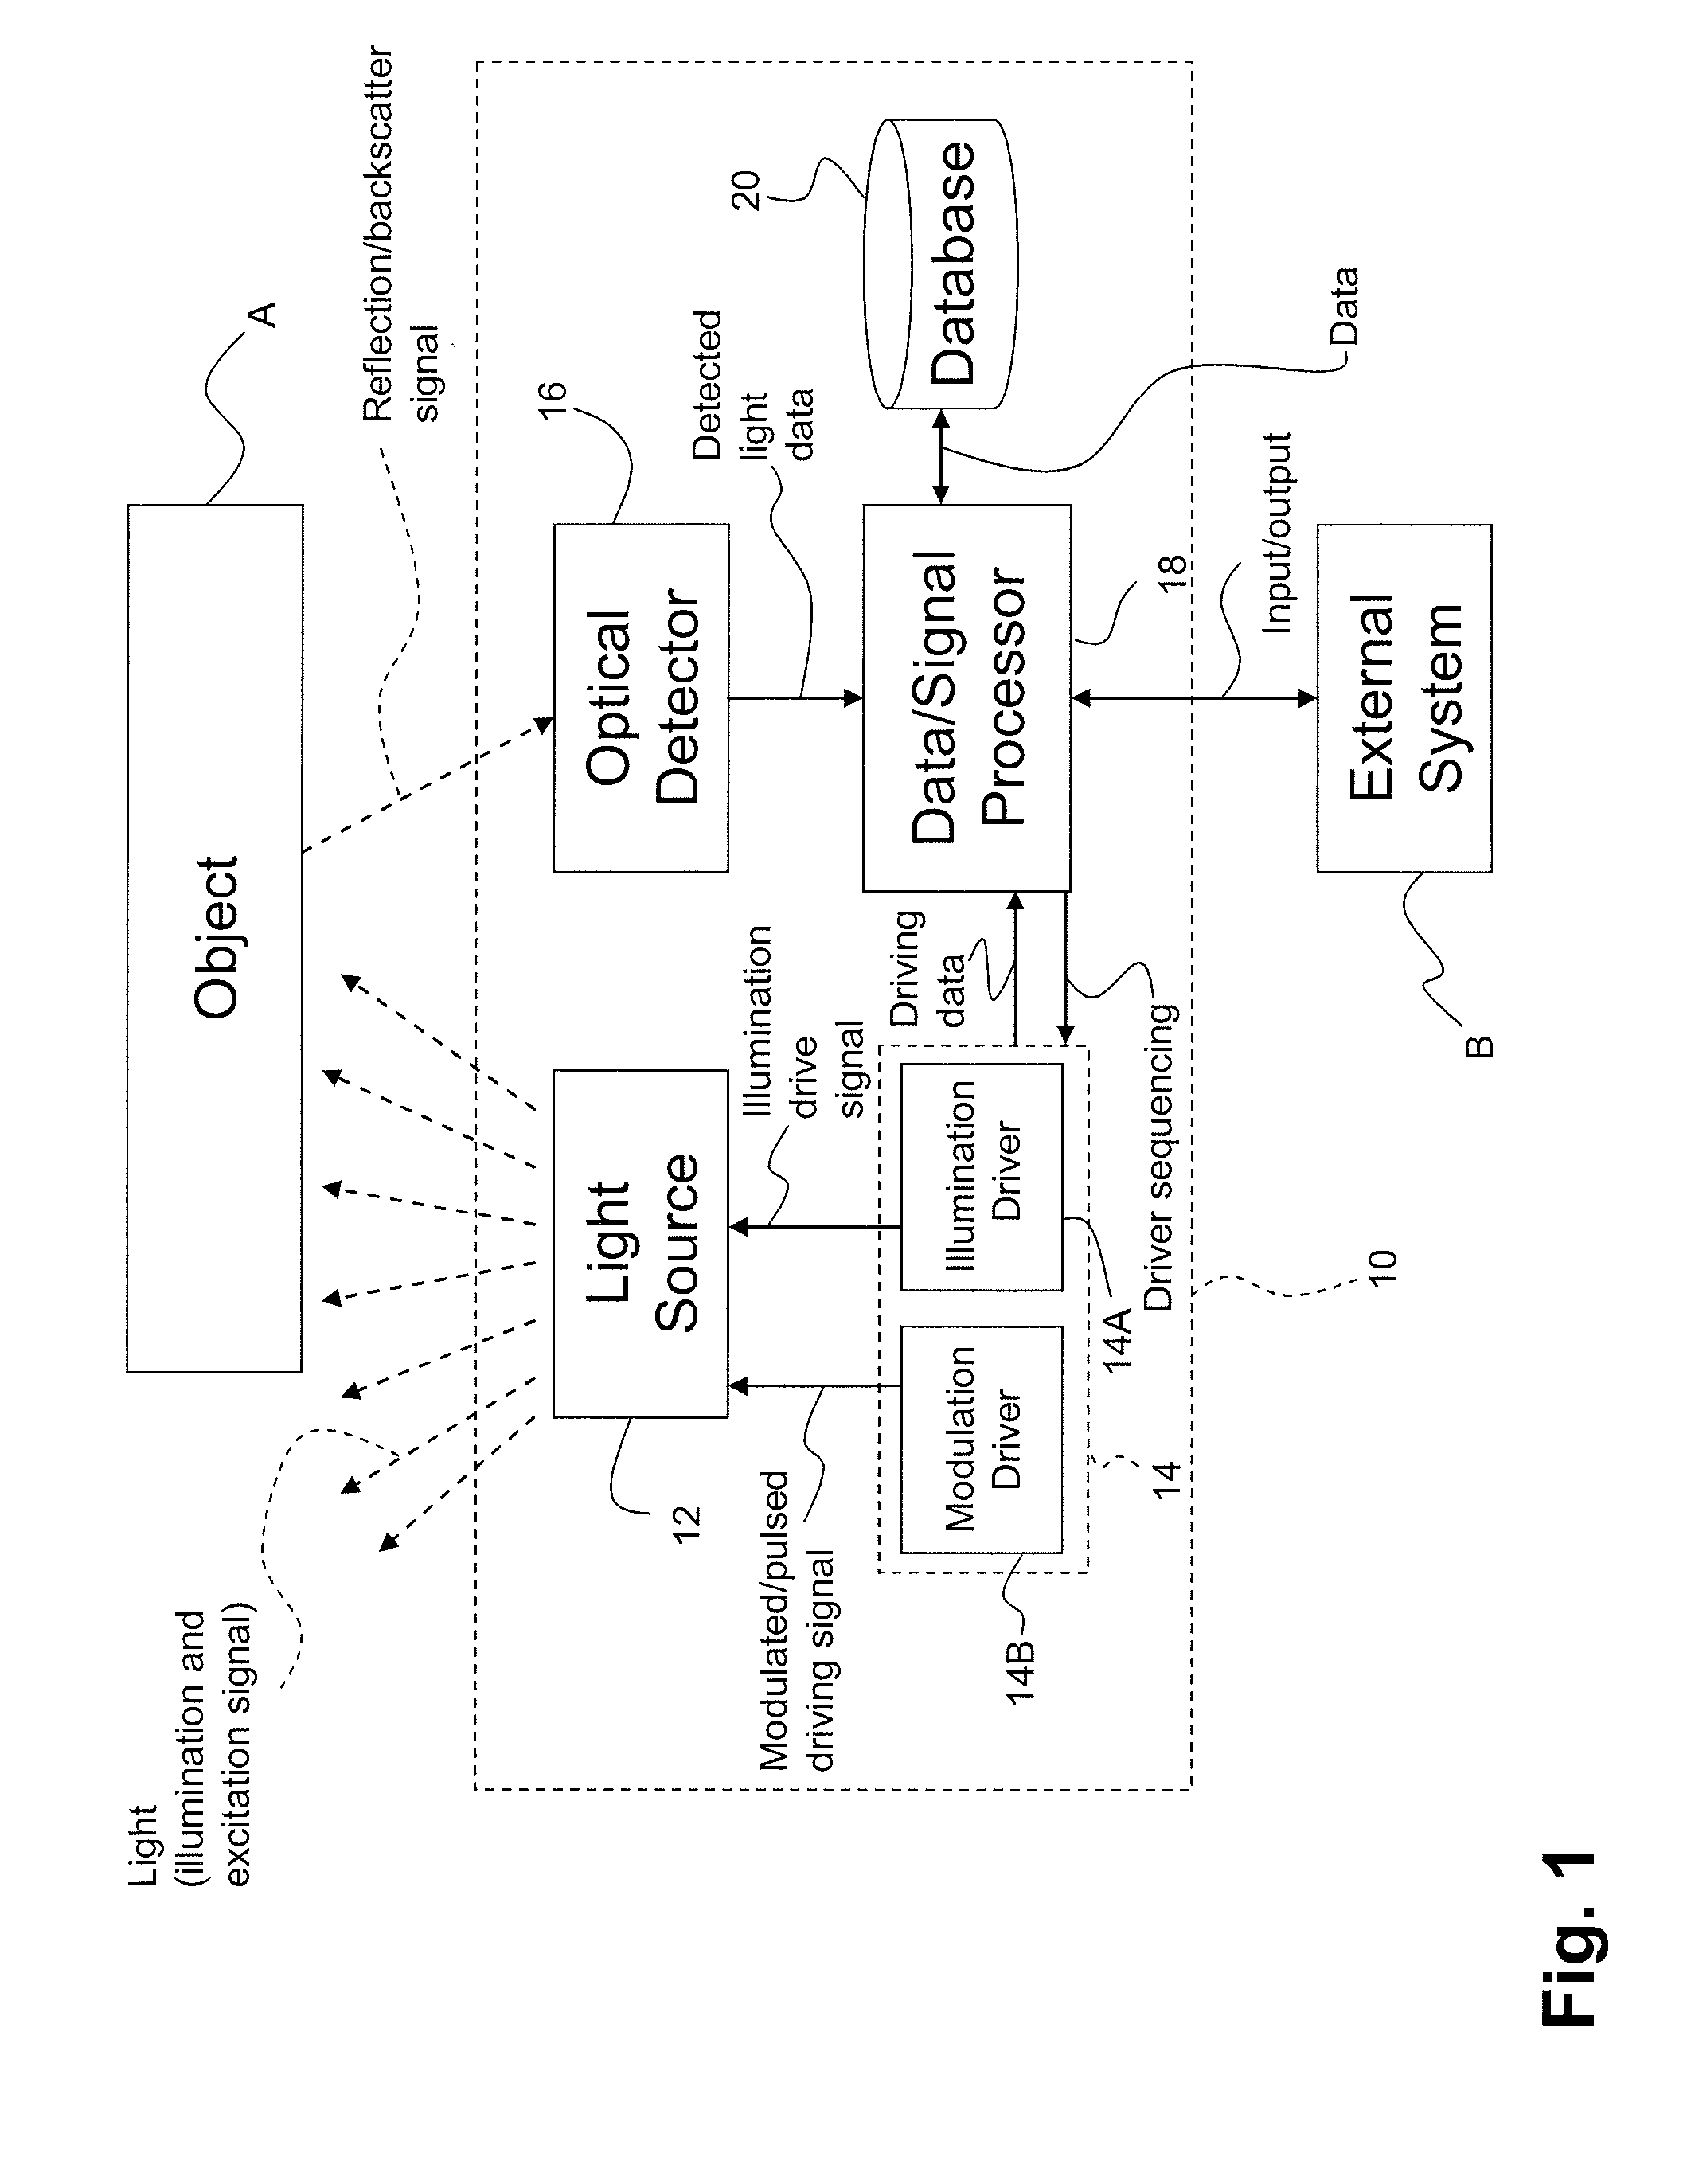 Object-detecting lighting system and method